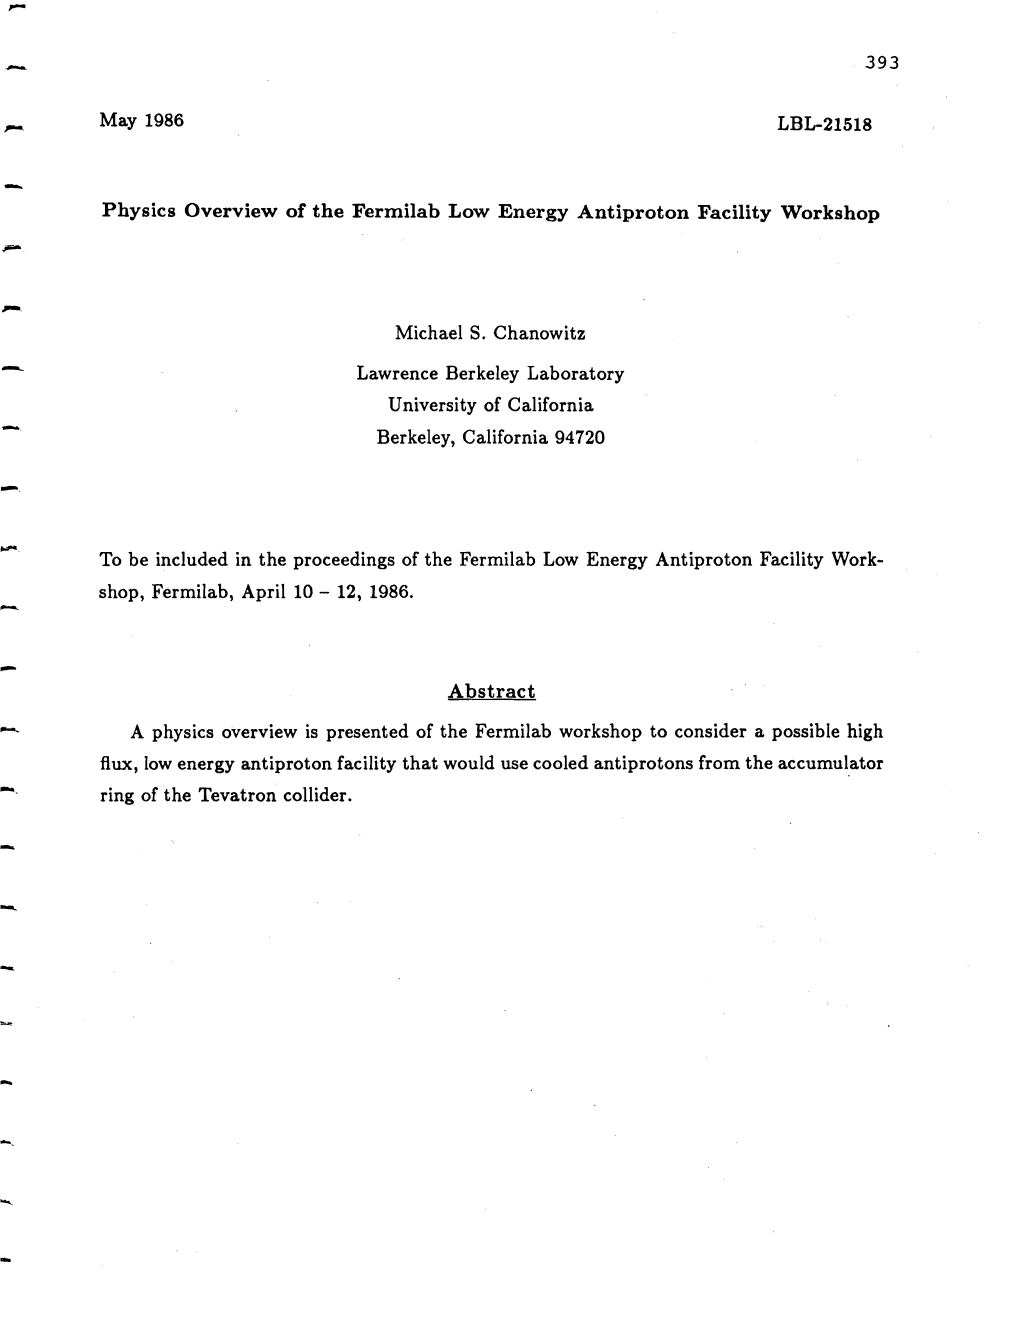 Physics Overview of the Fermilab Low Energy Antiproton Facility Workshop